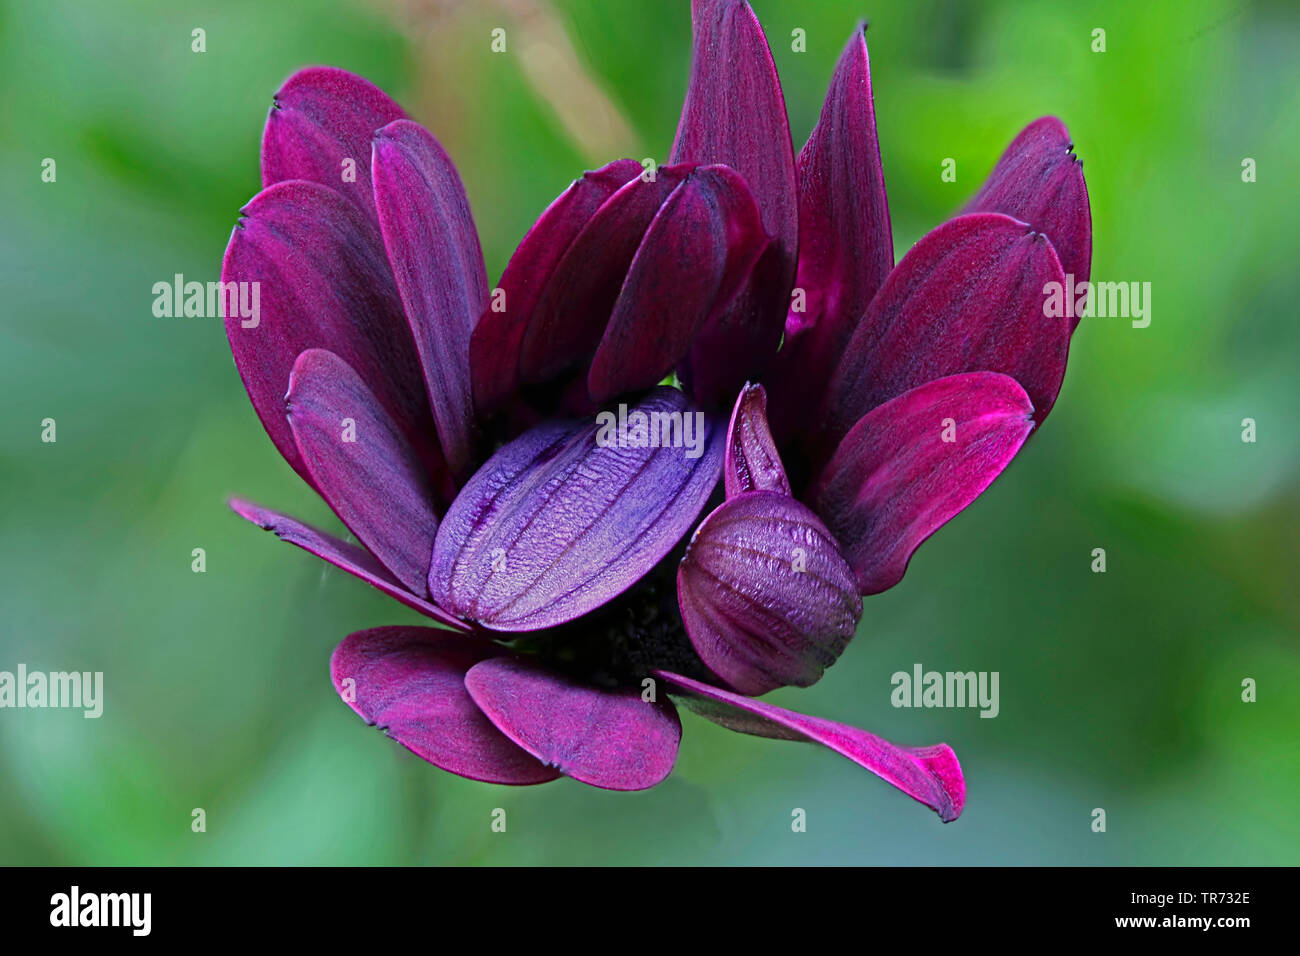 African Daisy, Lavender African Daisy, Norlindh freeway daisy (Osteospermum ecklonis), inflorescence Stock Photo